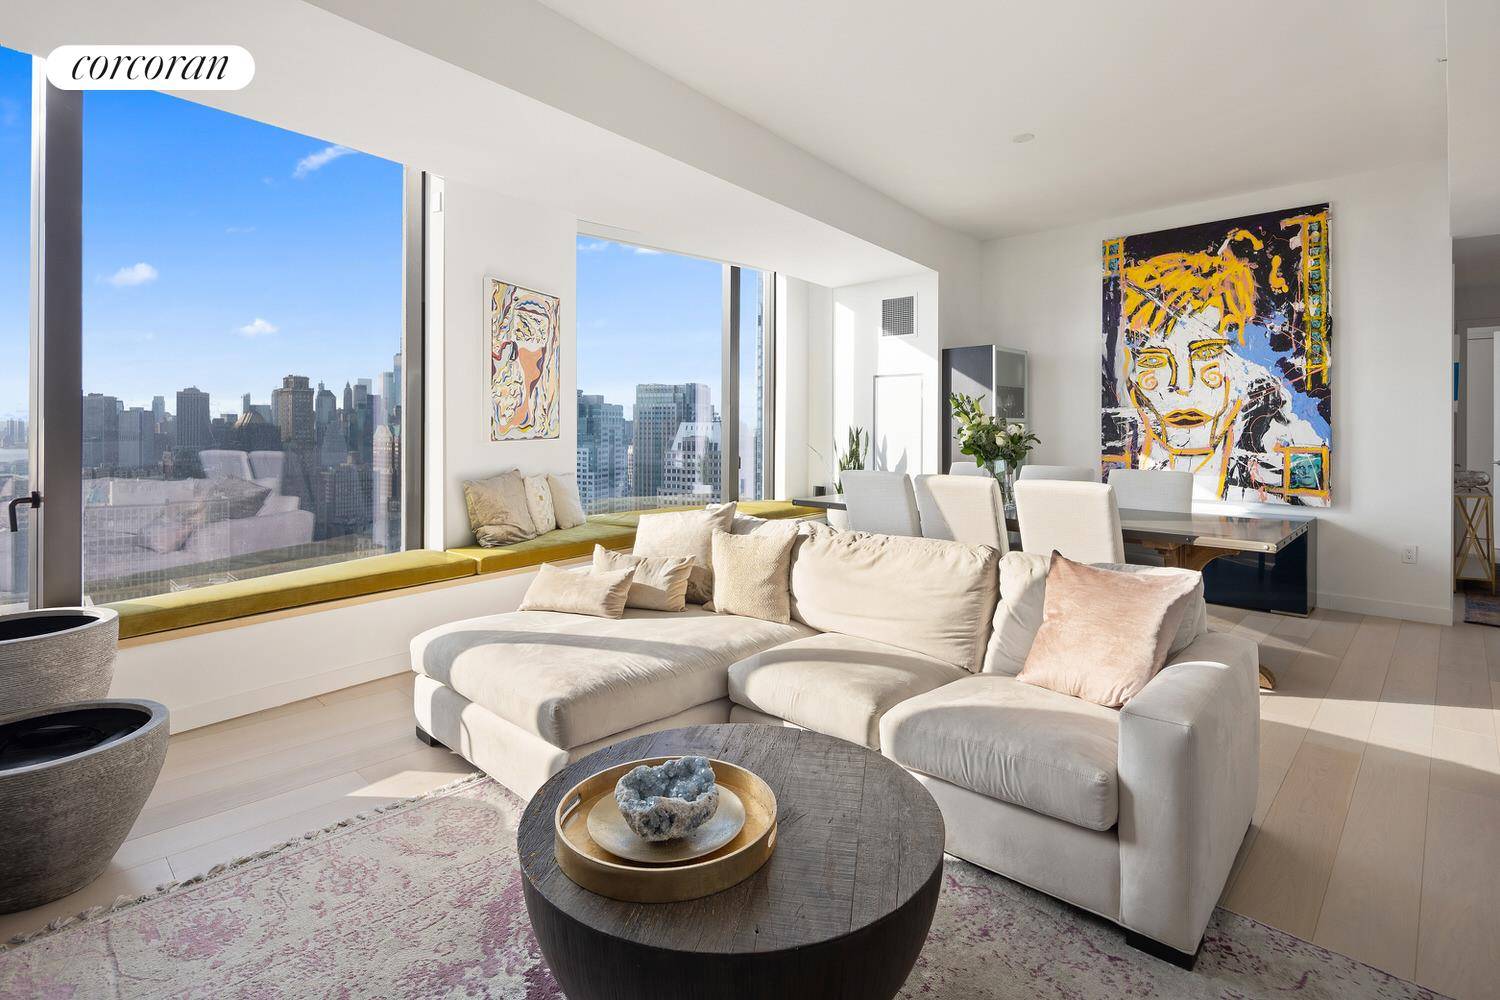 Step inside 36J at 11 Hoyt and discover the best views of the city through oversized double bay windows !